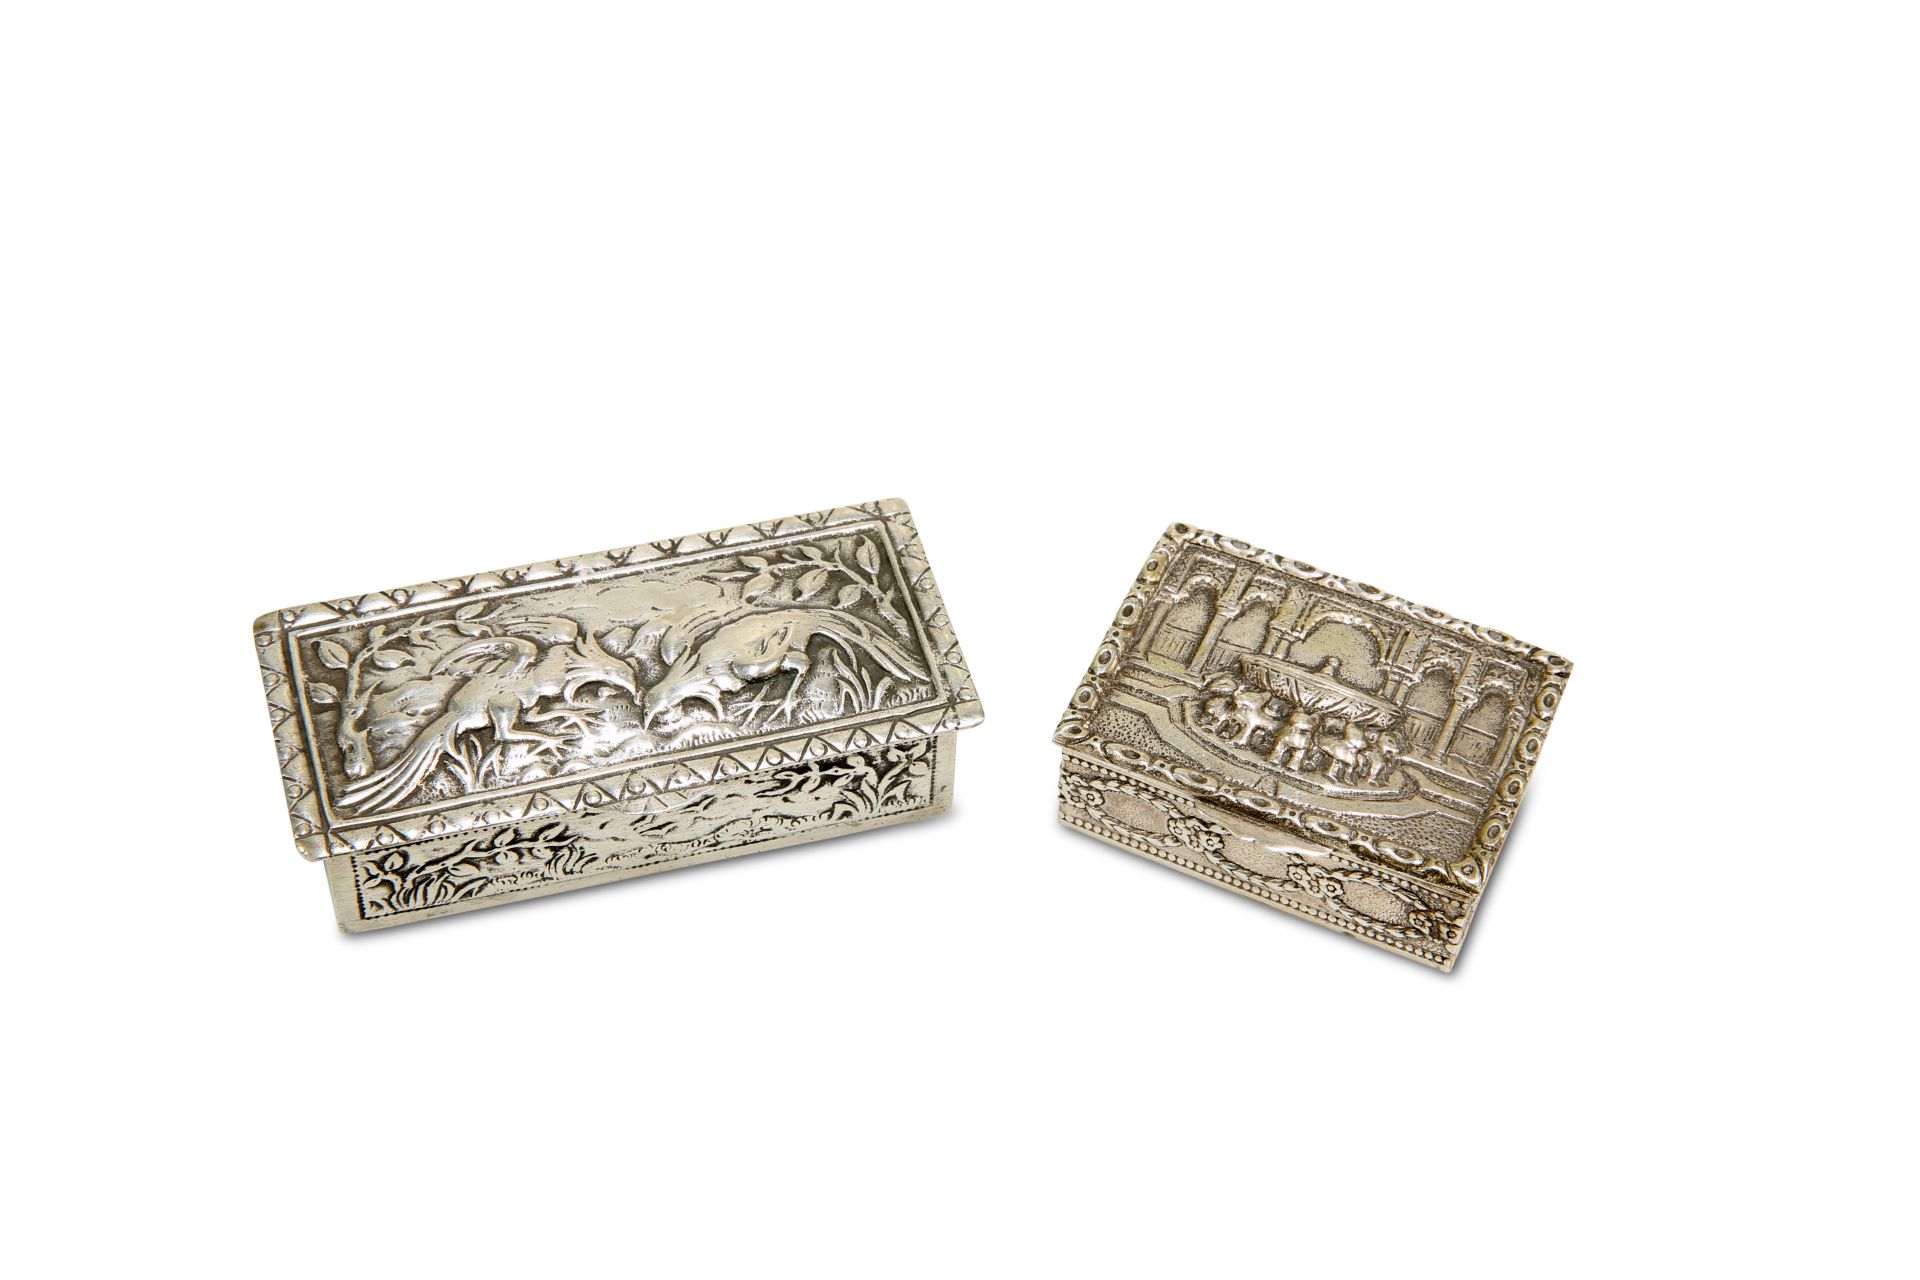 TWO CONTINENTAL SILVER BOXES